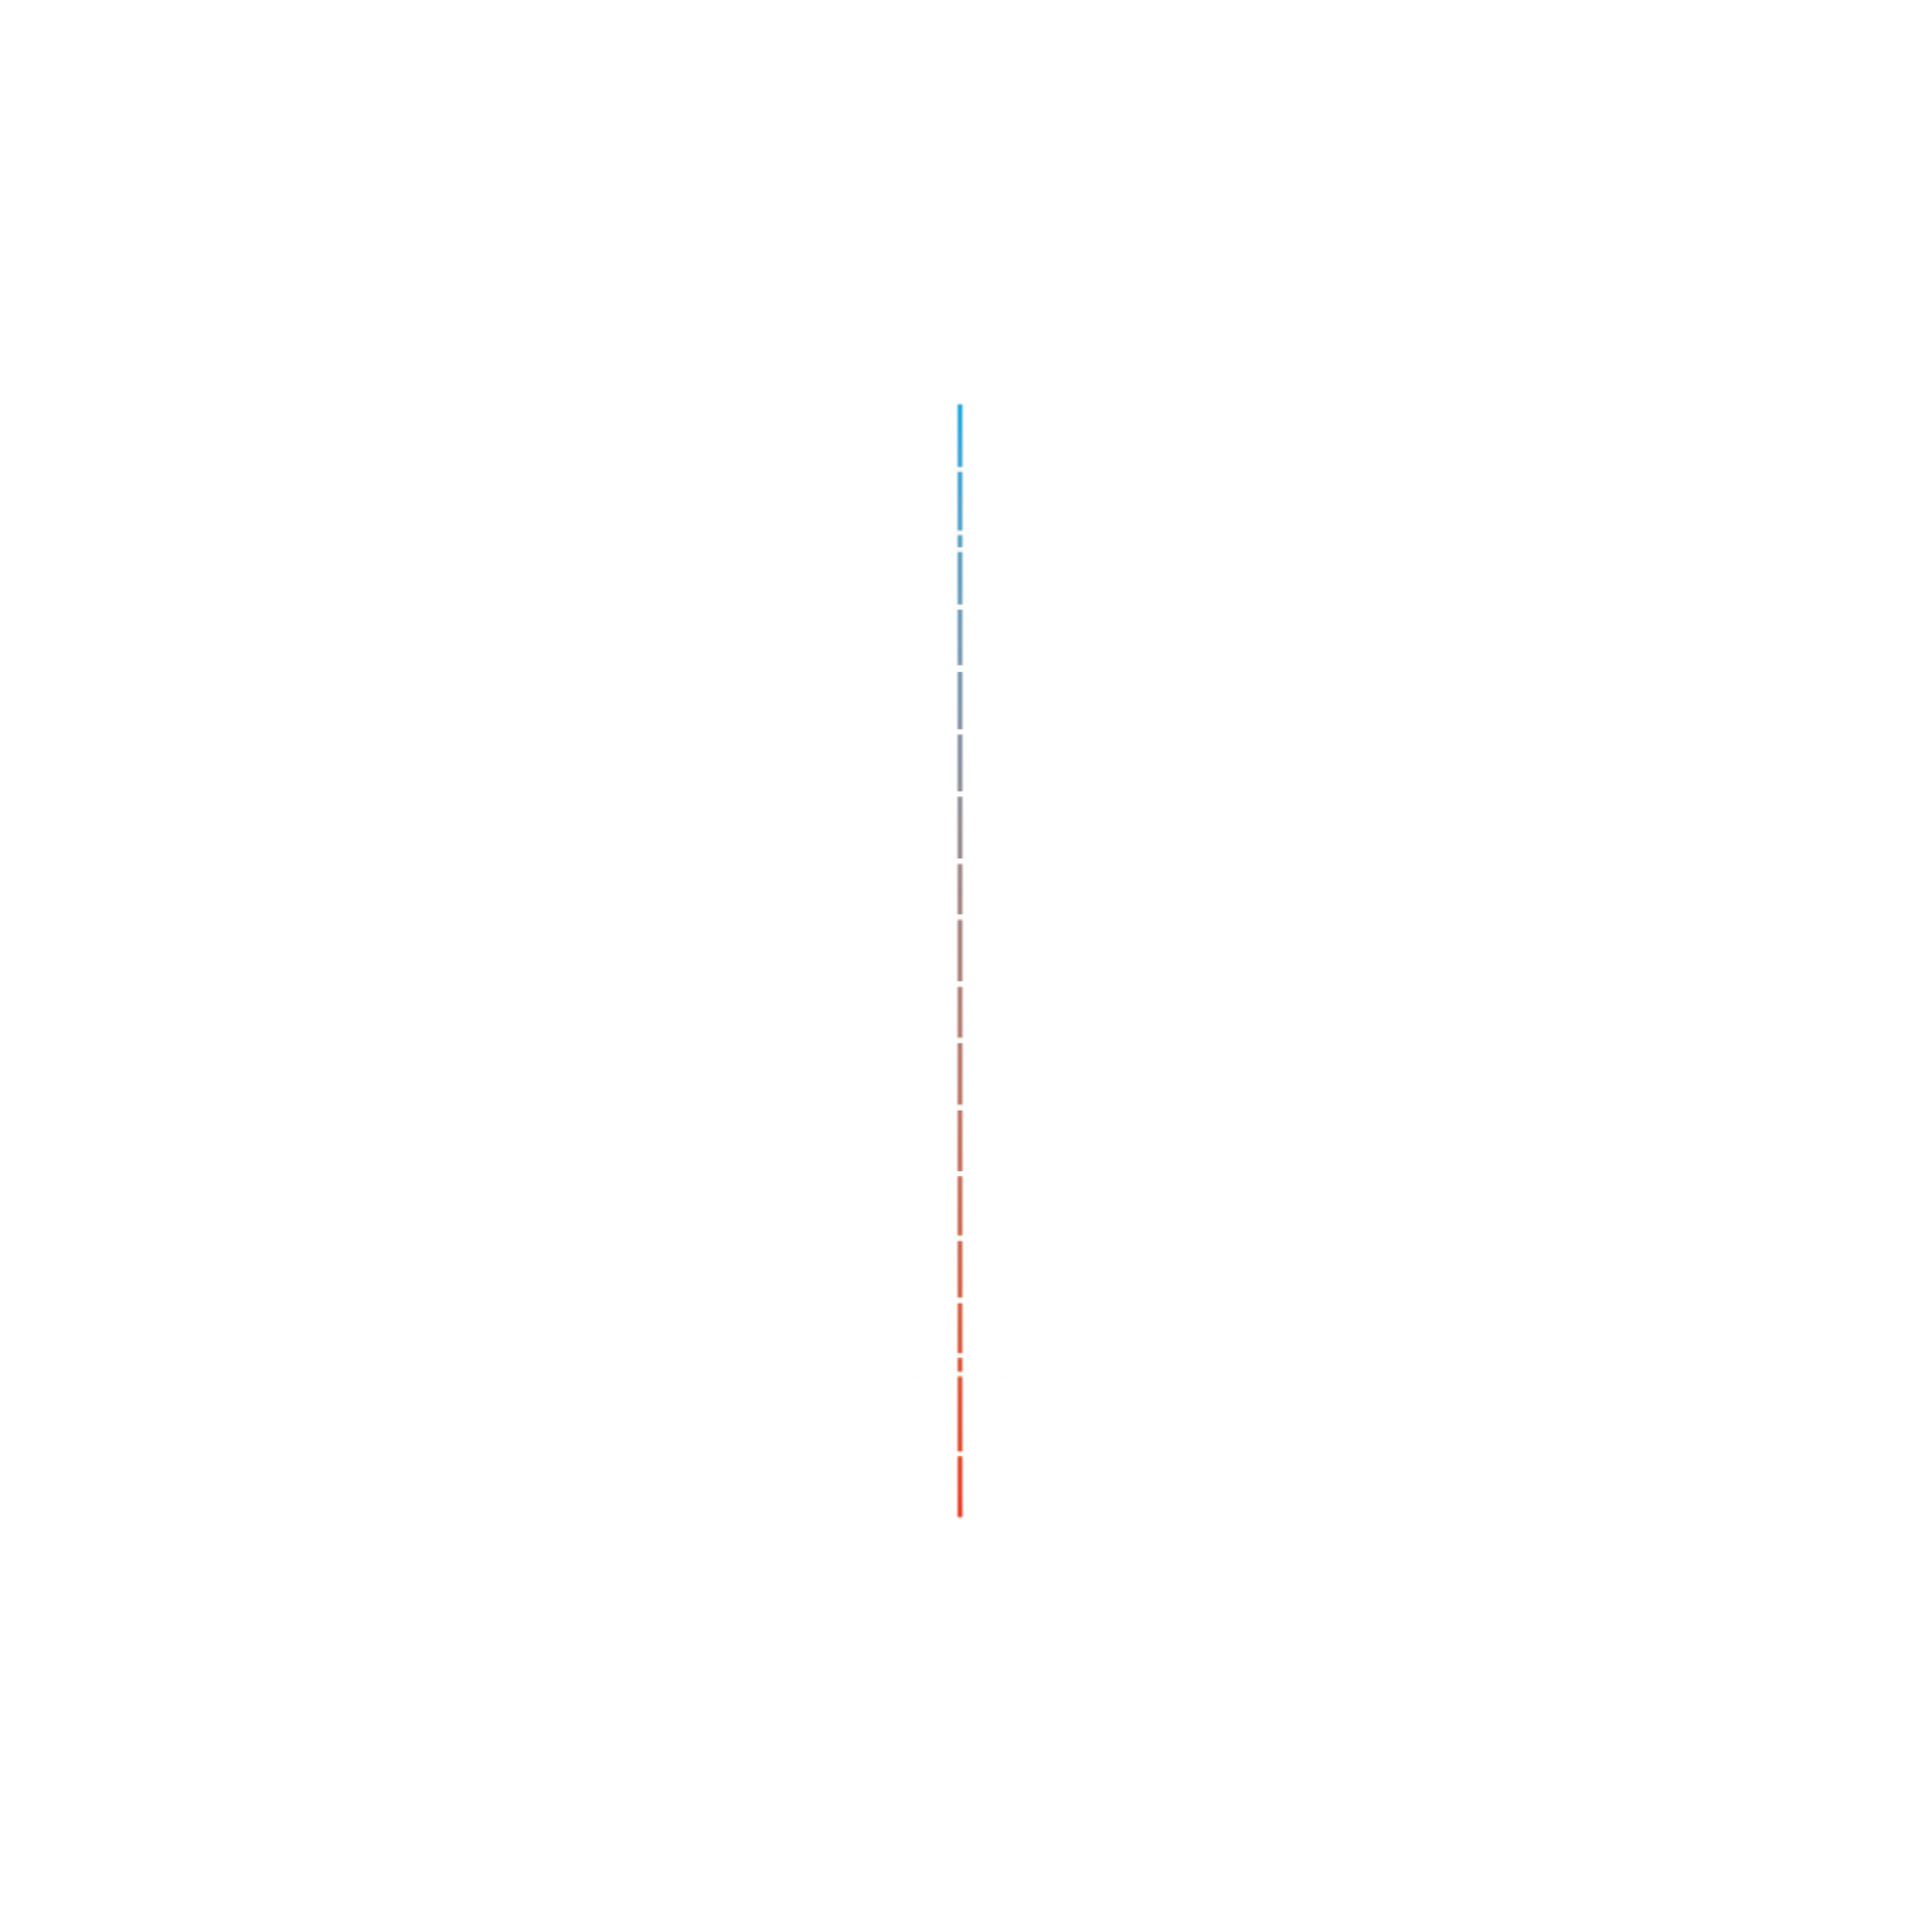 Illustration featuring cylindrical grid with red/blue line showing pressure build-up reduction that encourages healthy movement on black background.